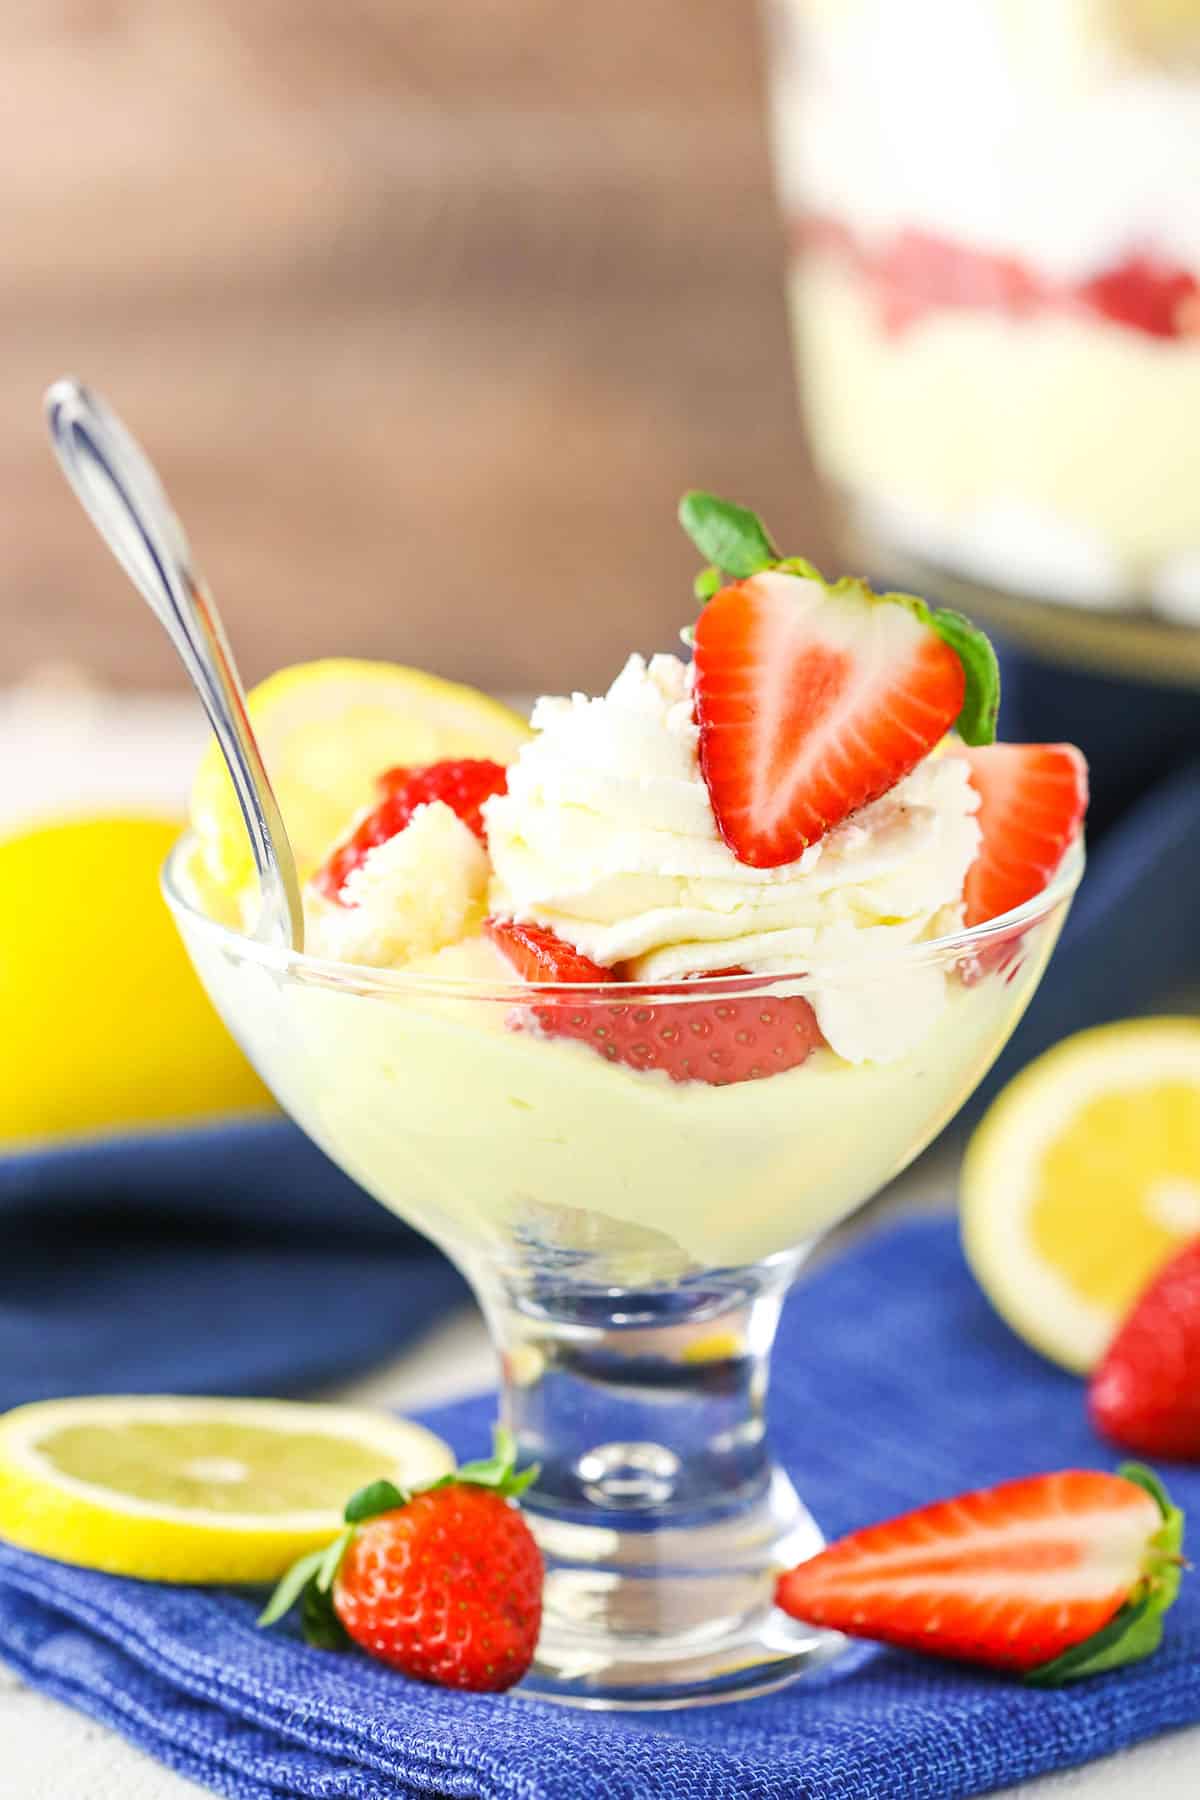 A serving of Lemon Strawberry Trifle in a clear glass dish with a silver spoon